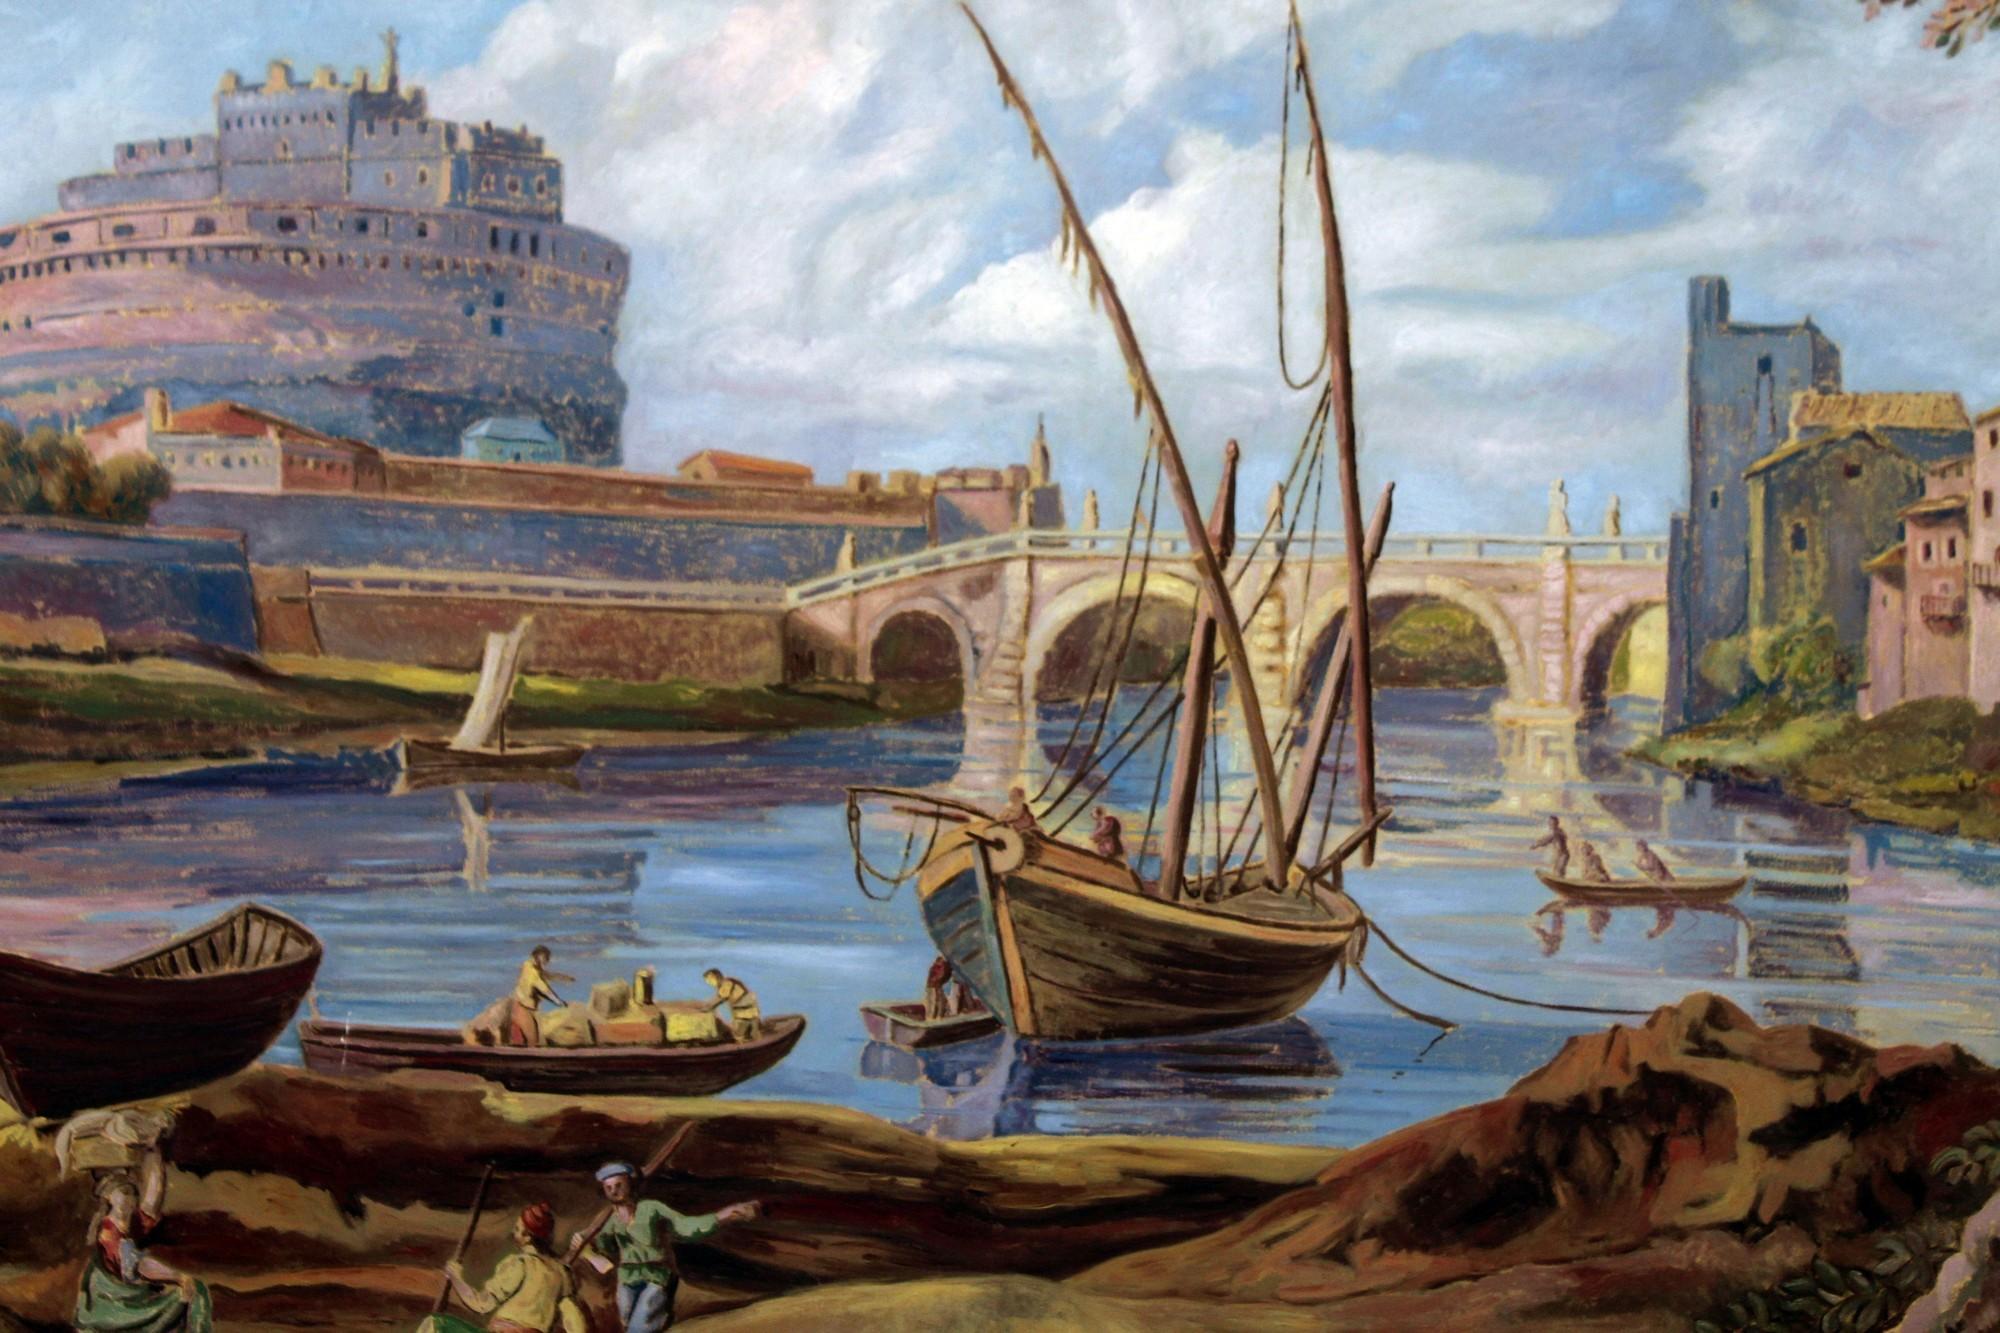 The painting is typical genre scene of Rome of the 17th century, a daily life along the Tiber river.   with the river Tiber, Castel Sant'Angelo.
Fishermen and characters are on the bank of the river, while several boats travel along it. In the